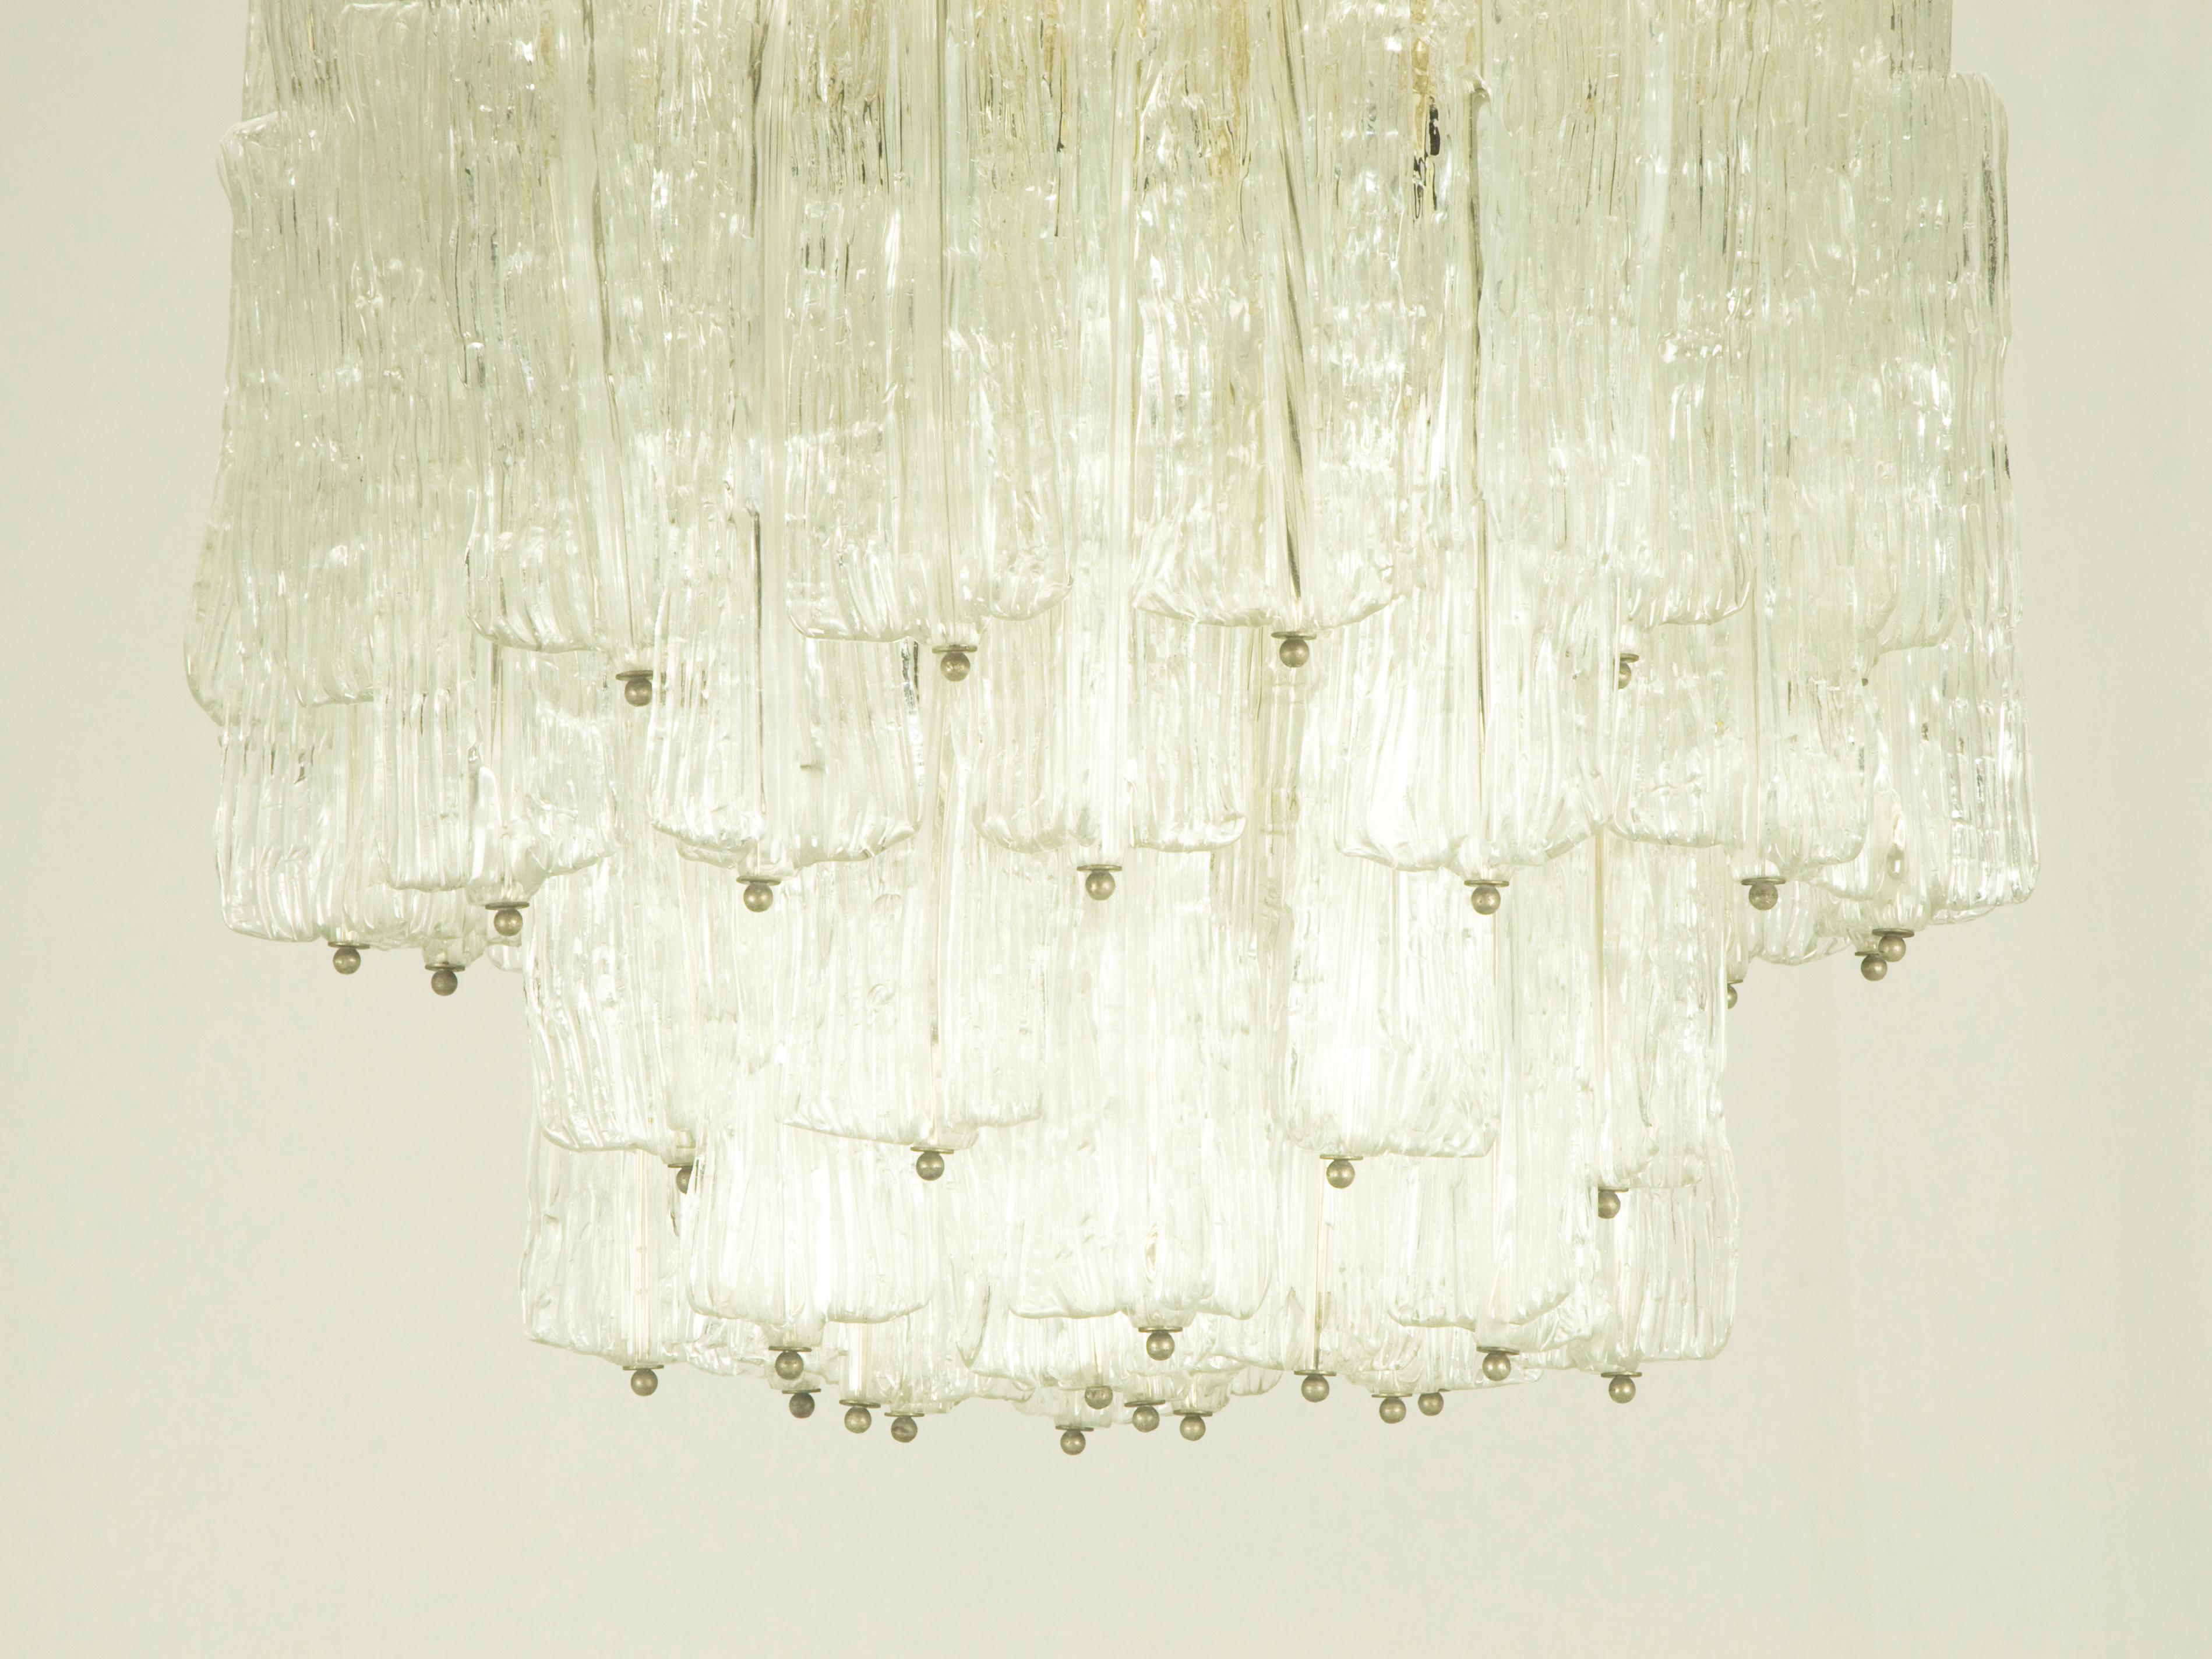 This rare chandelier was produced in Italy by the famous glassworks Venini, circa 1960s. It is made from 51 handmade pieces of transparent glass hung on the painted metal structure. Venini mark imprinted by maker on the metal frame. 
The chandelier